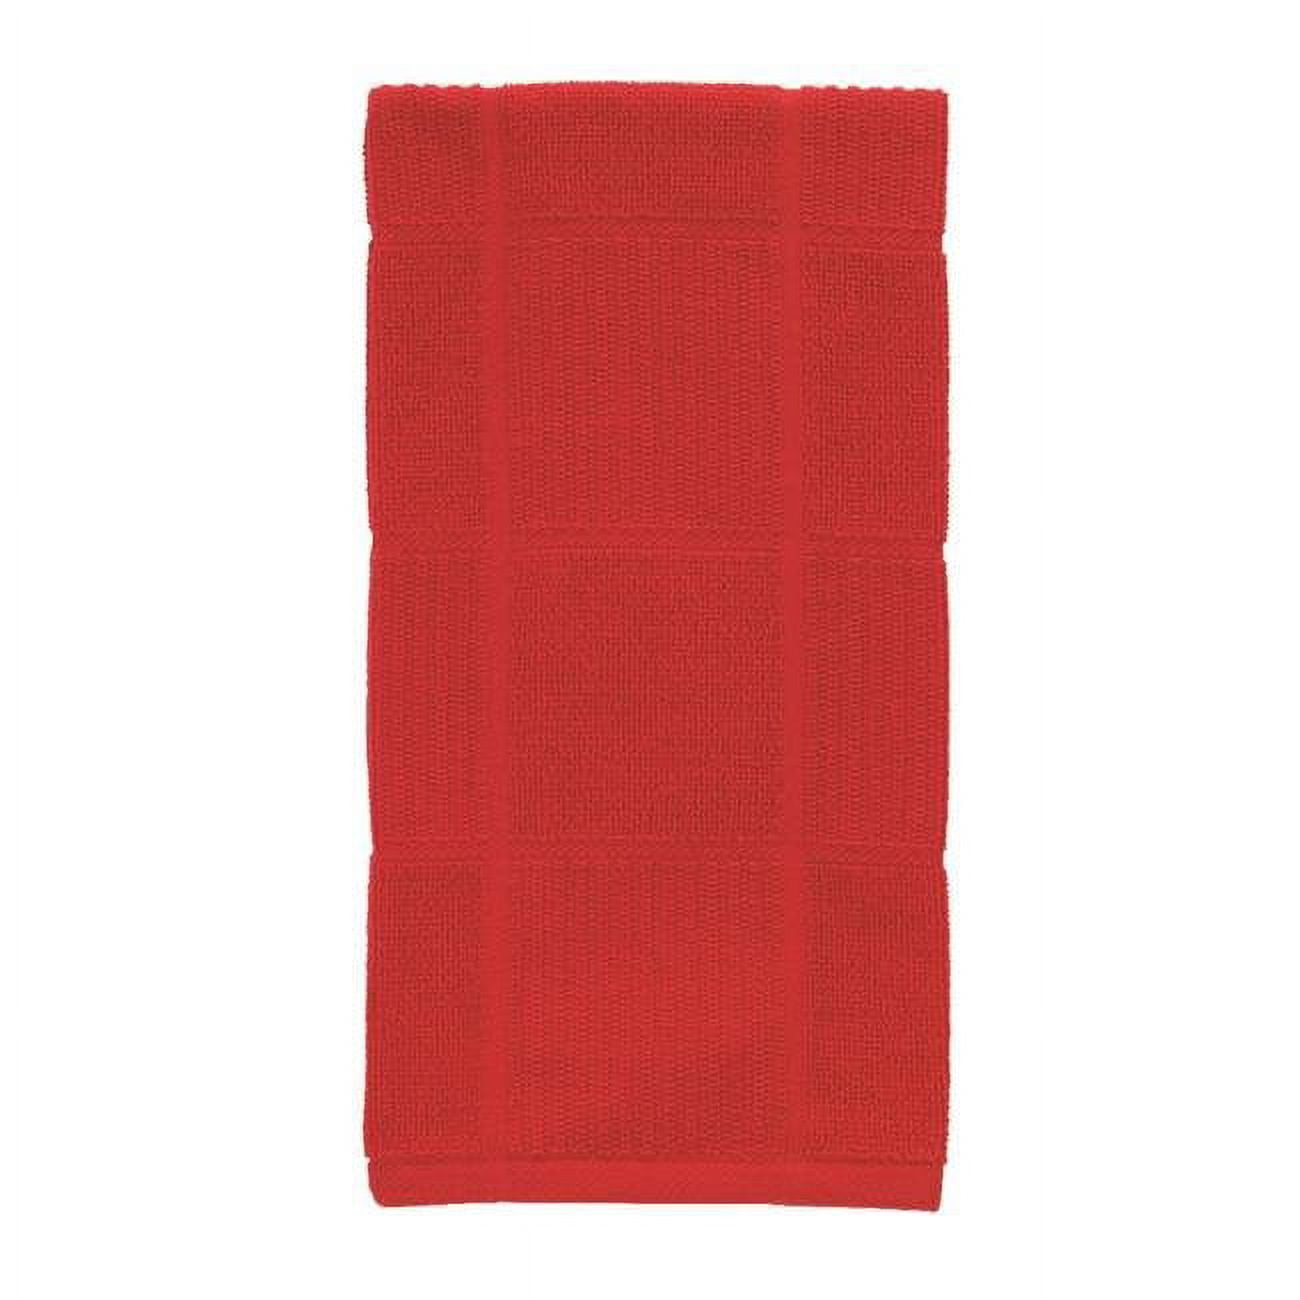 T-fal 6517387 Red Cotton Kitchen Towel - Pack Of 6